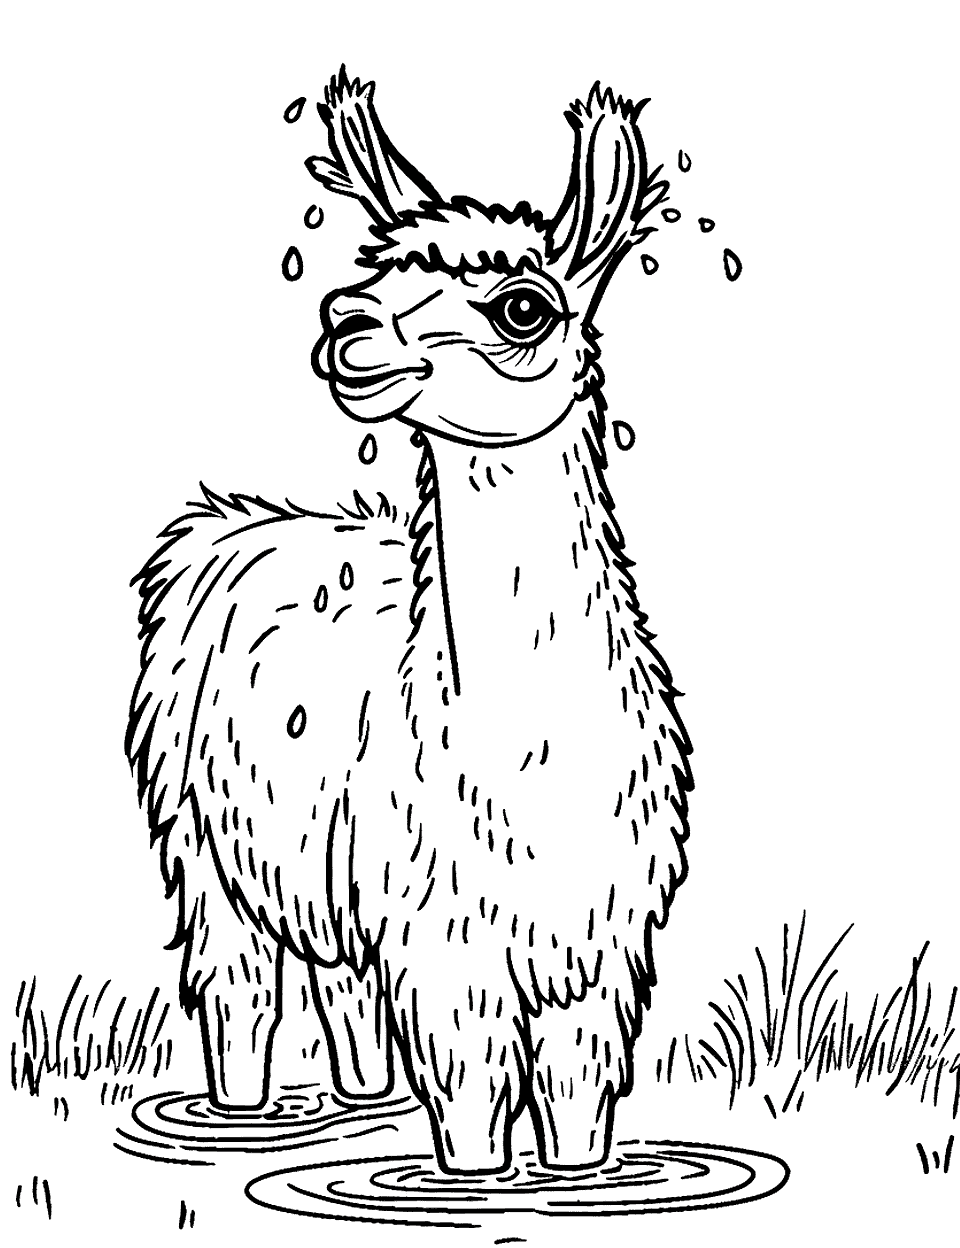 Llama in a Puddle Coloring Page - A playful llama splashing in a small puddle.